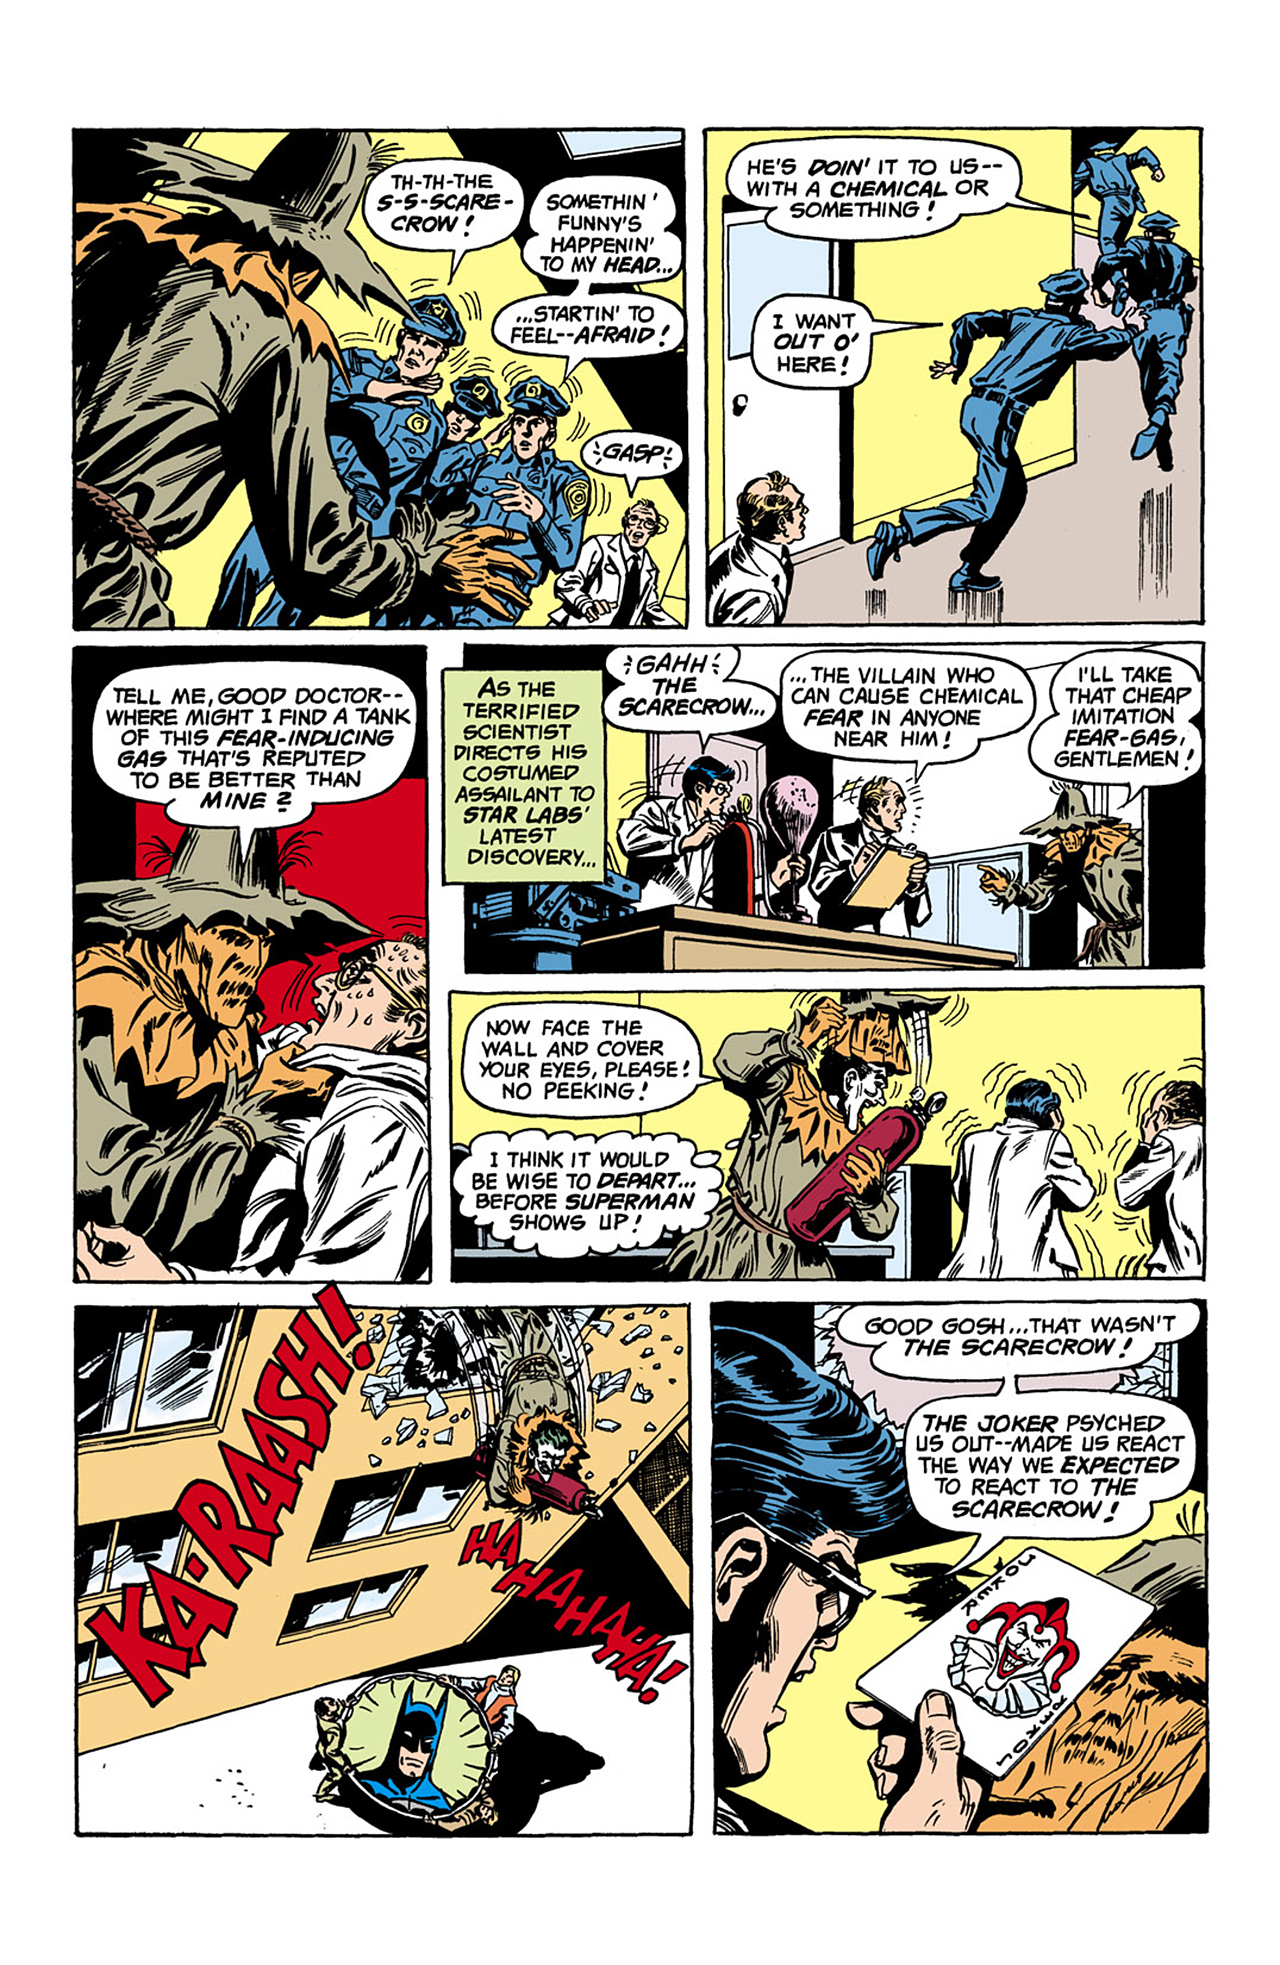 The Joker (1975-1976 + 2019): Chapter 8 - Page 5